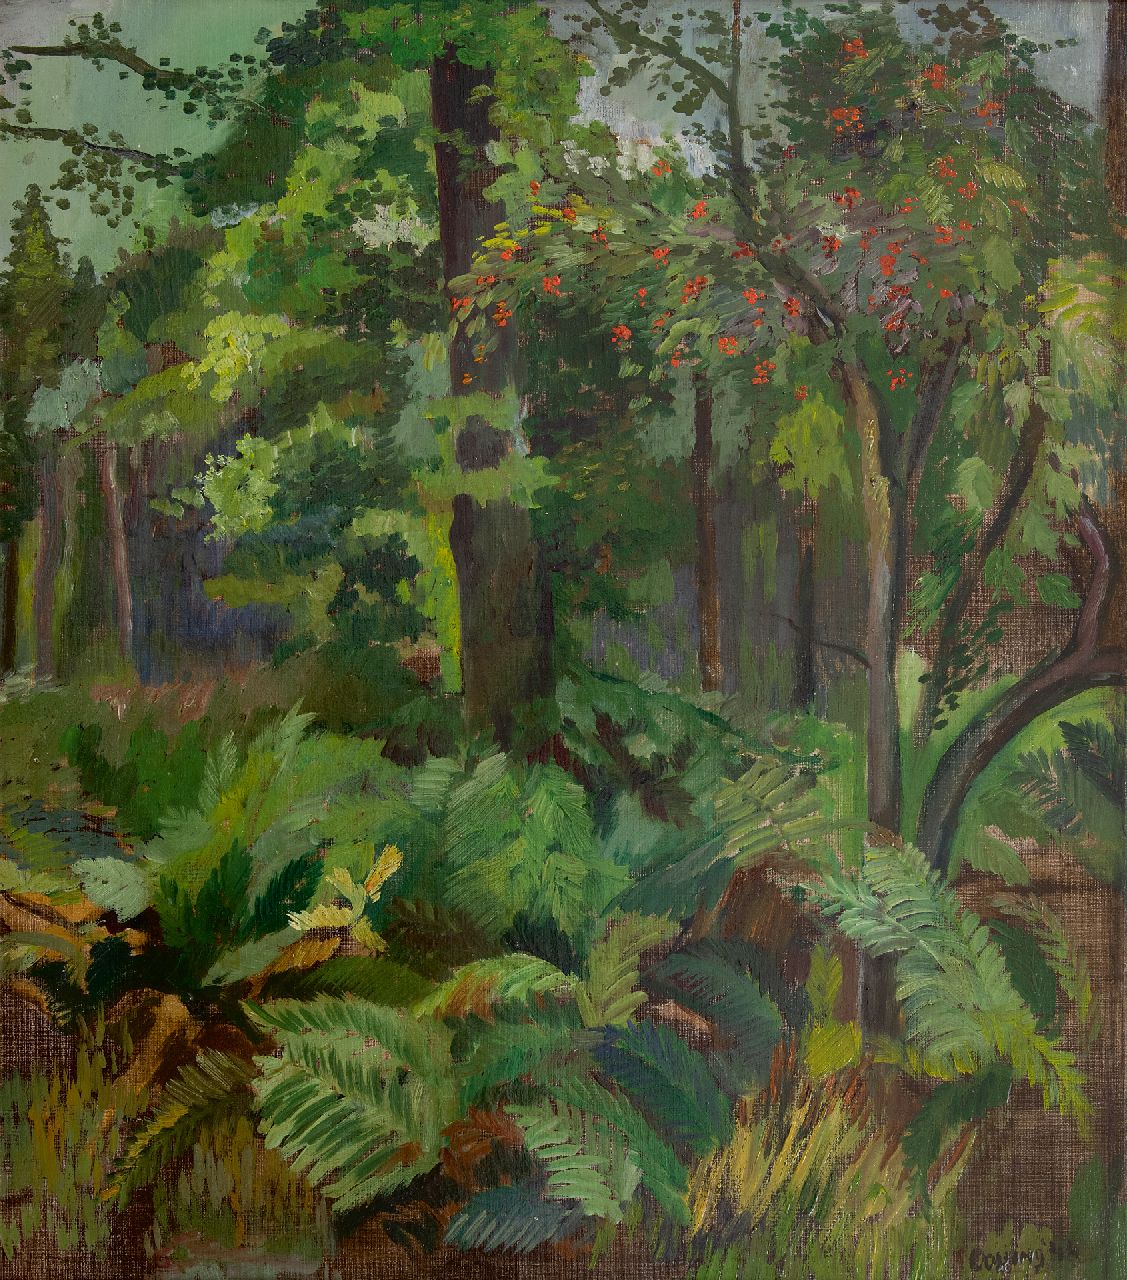 Bieruma Oosting A.J.W.  | Adriana Johanna Wilhelmina 'Jeanne' Bieruma Oosting, Forest view at the Lauswolt estate, oil on canvas 64.9 x 56.9 cm, signed l.r. and dated '44